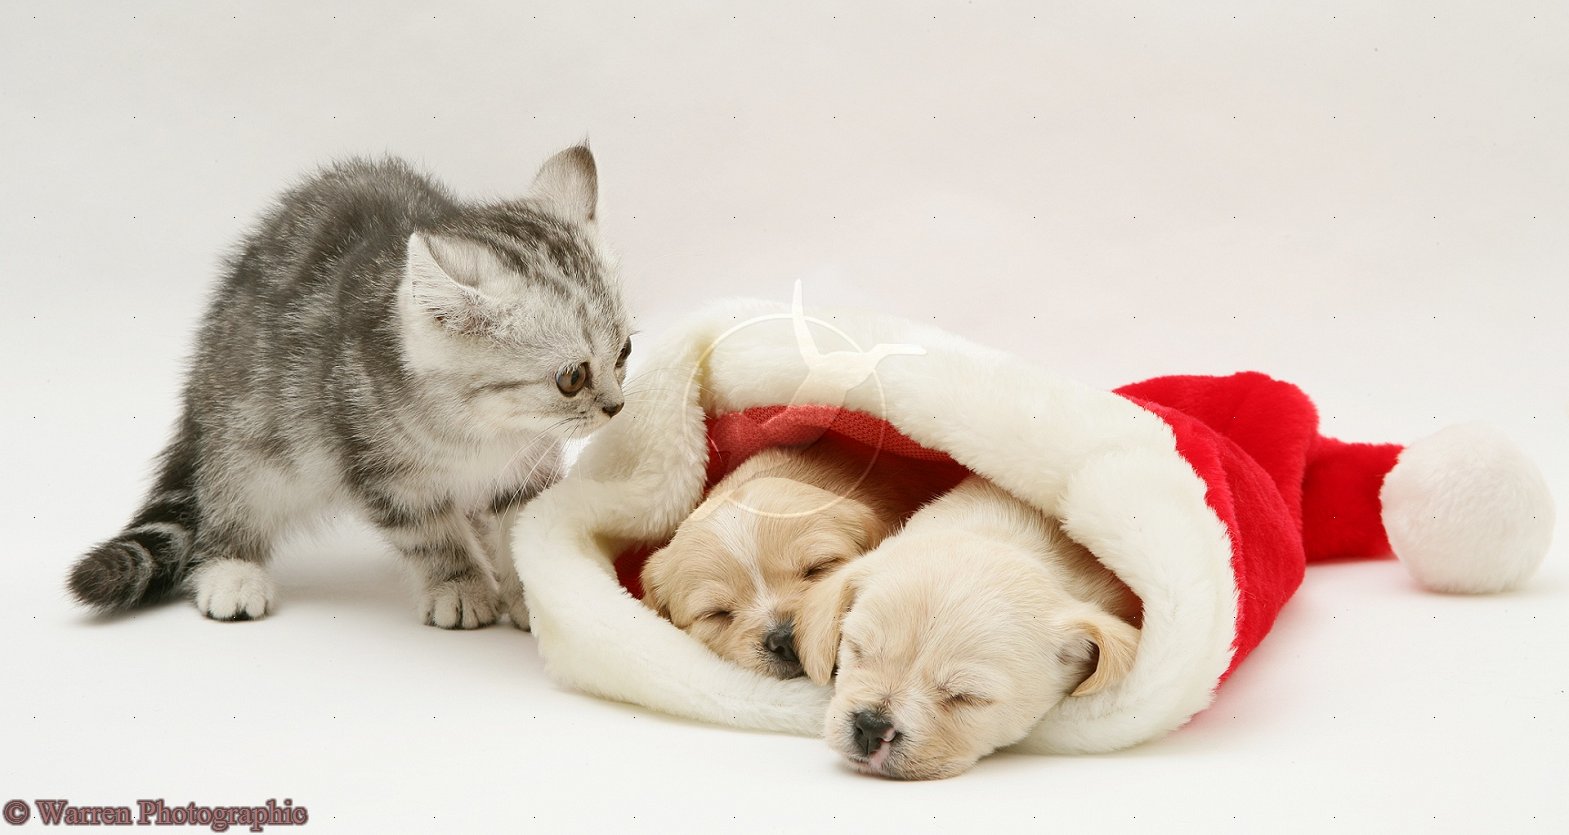 Cute Puppies And Kittens Together Wallpaper Christmas